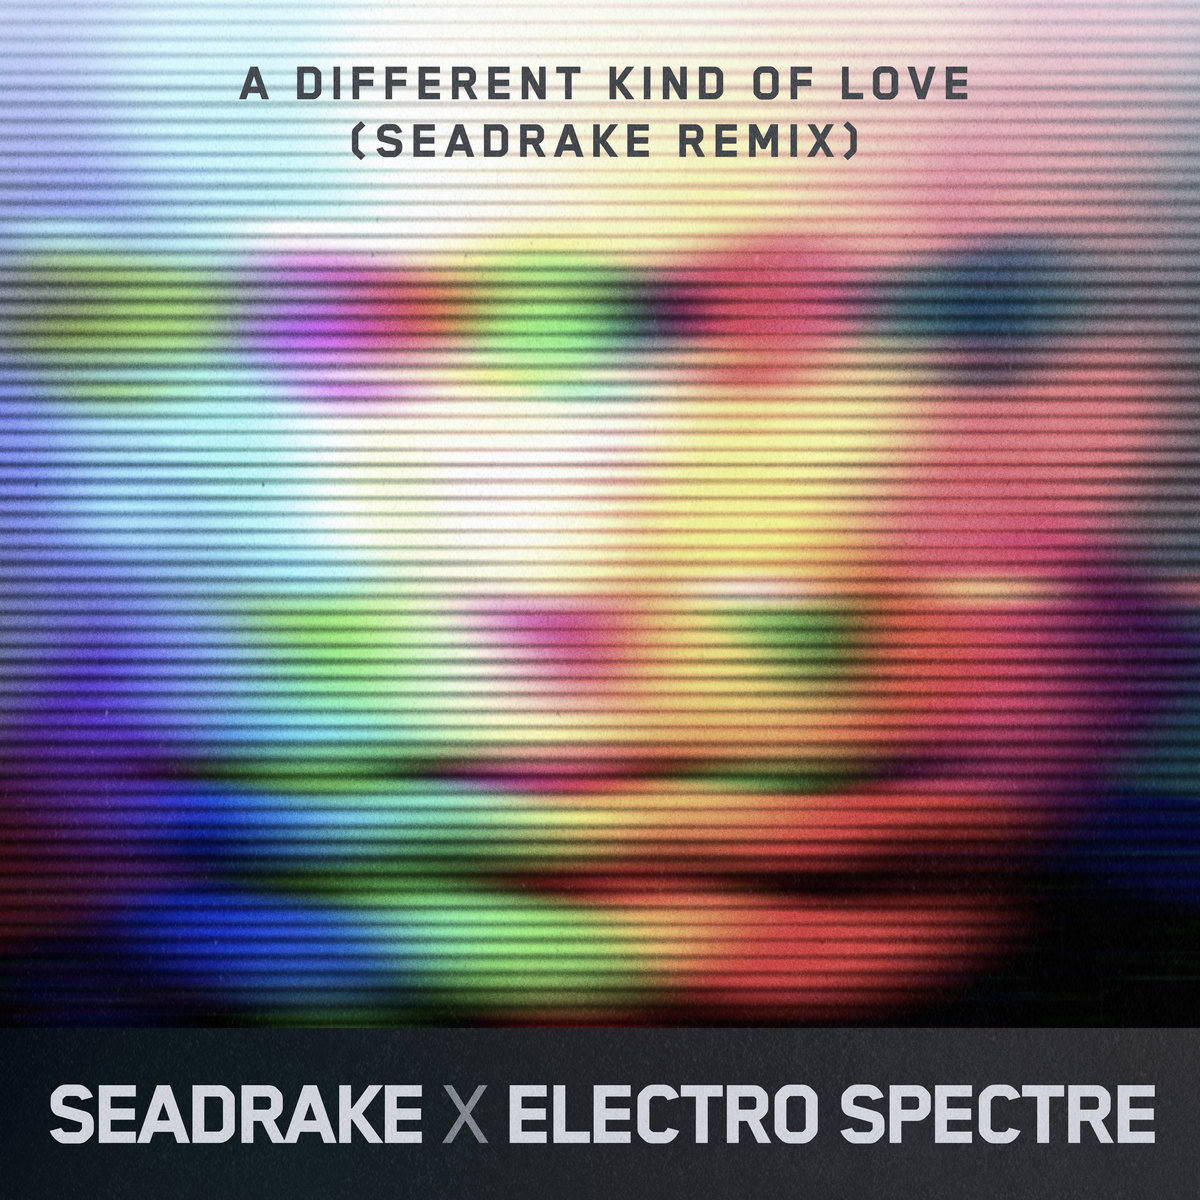 SEADRAKE X ELECTRO SPECTRE A DIFFERENT KIND OF LOVE (REMIX) DIGITAL